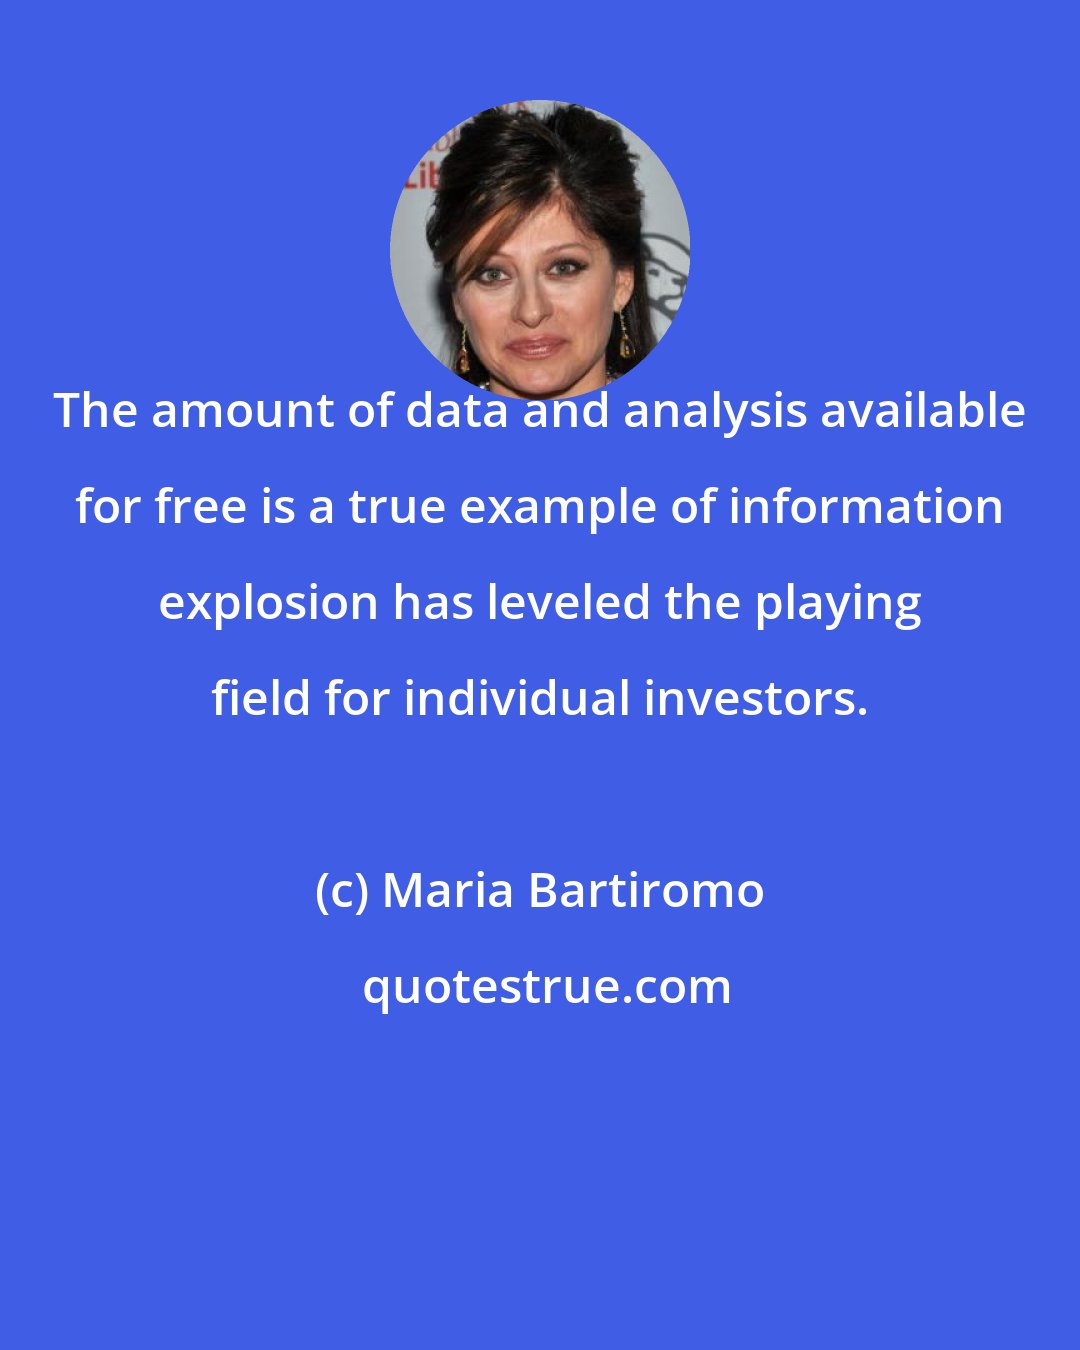 Maria Bartiromo: The amount of data and analysis available for free is a true example of information explosion has leveled the playing field for individual investors.